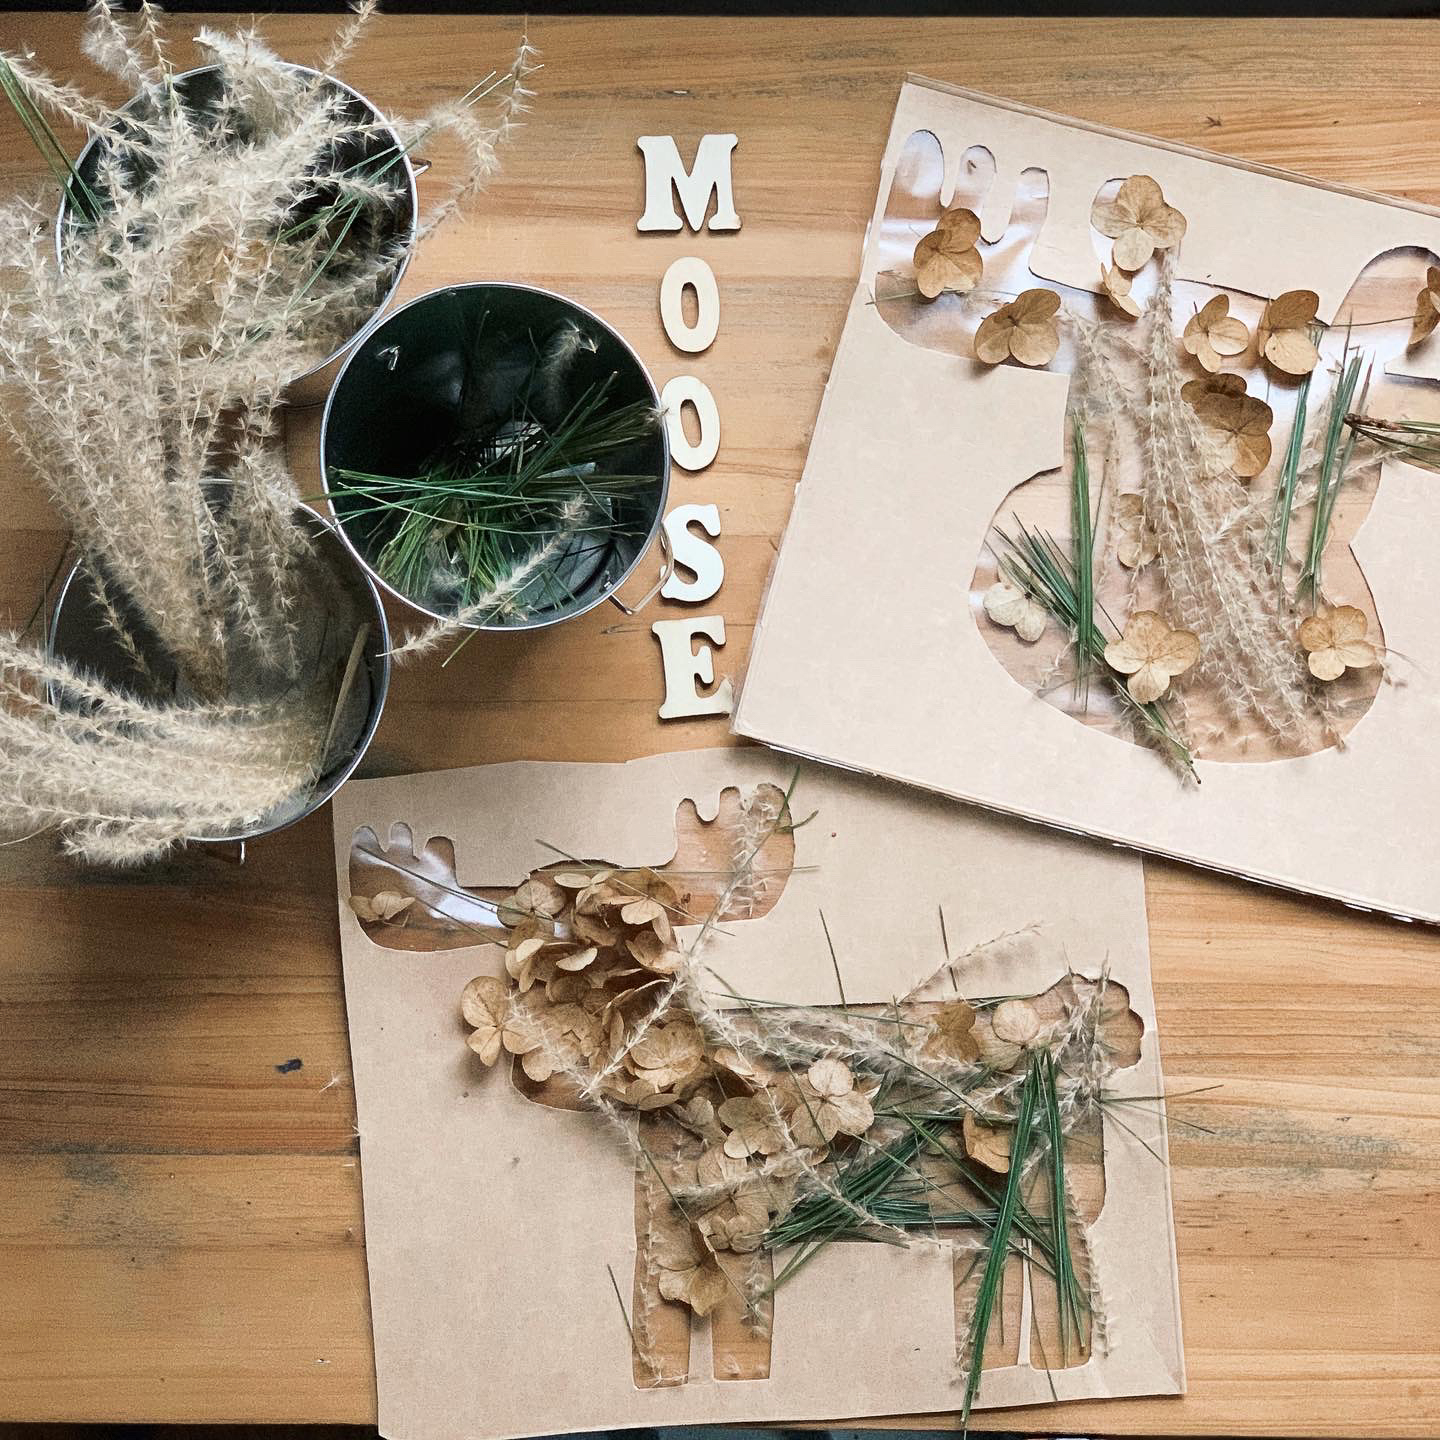 Completed kids nature moose craft